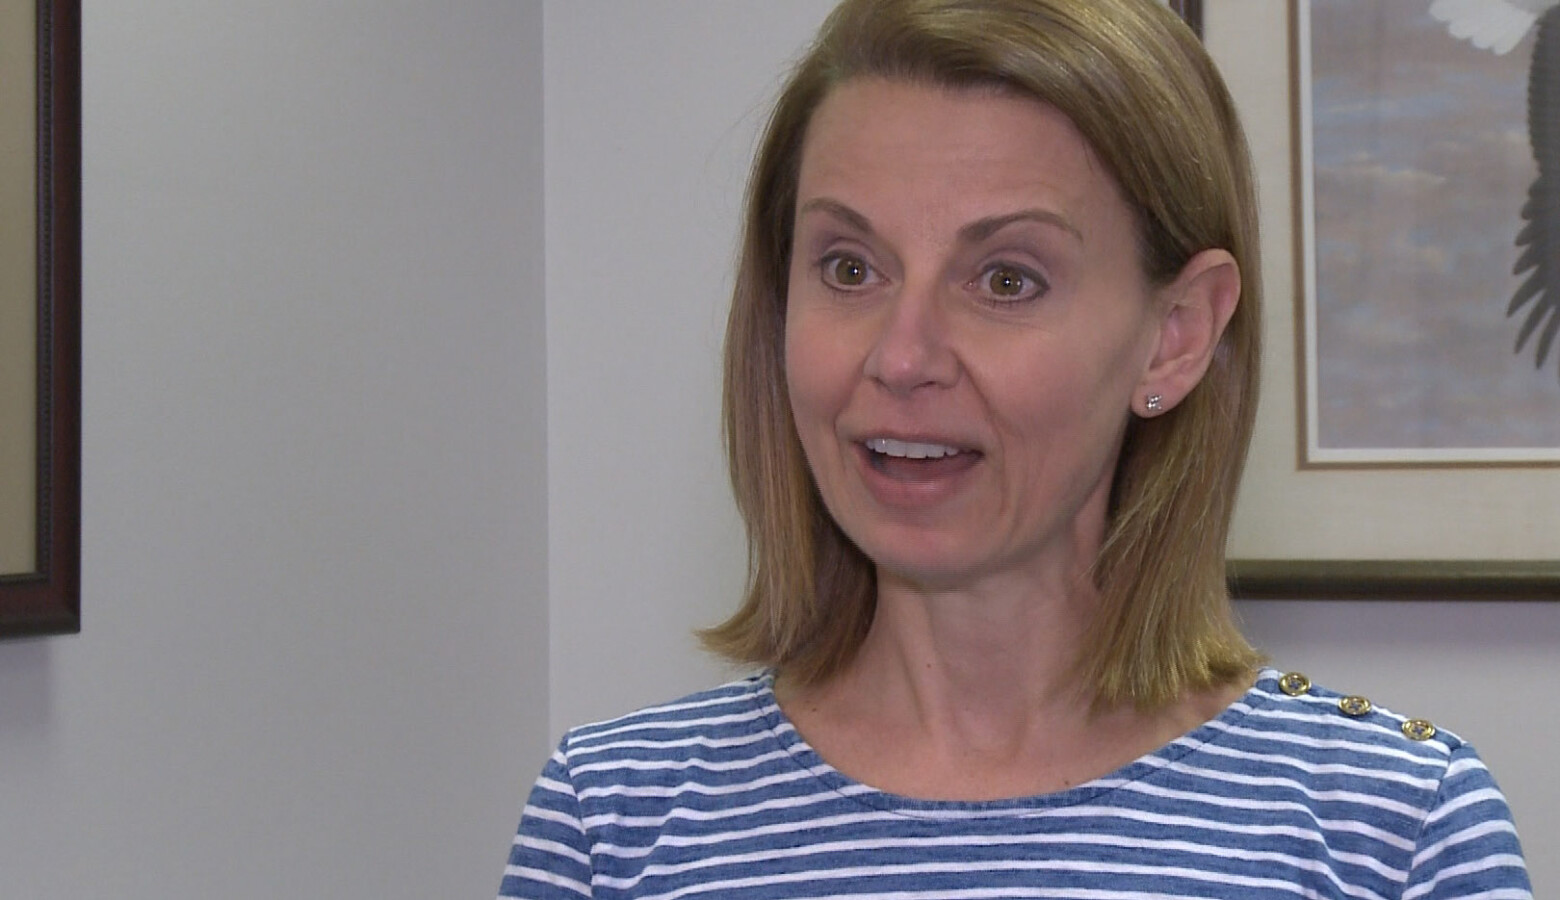 Brown County Schools Superintendent Laura Hammack said her corporation's application would change how they calculate instructional time, allowing schools to count instructional hours, not days. (Joe Hren/WTIU)